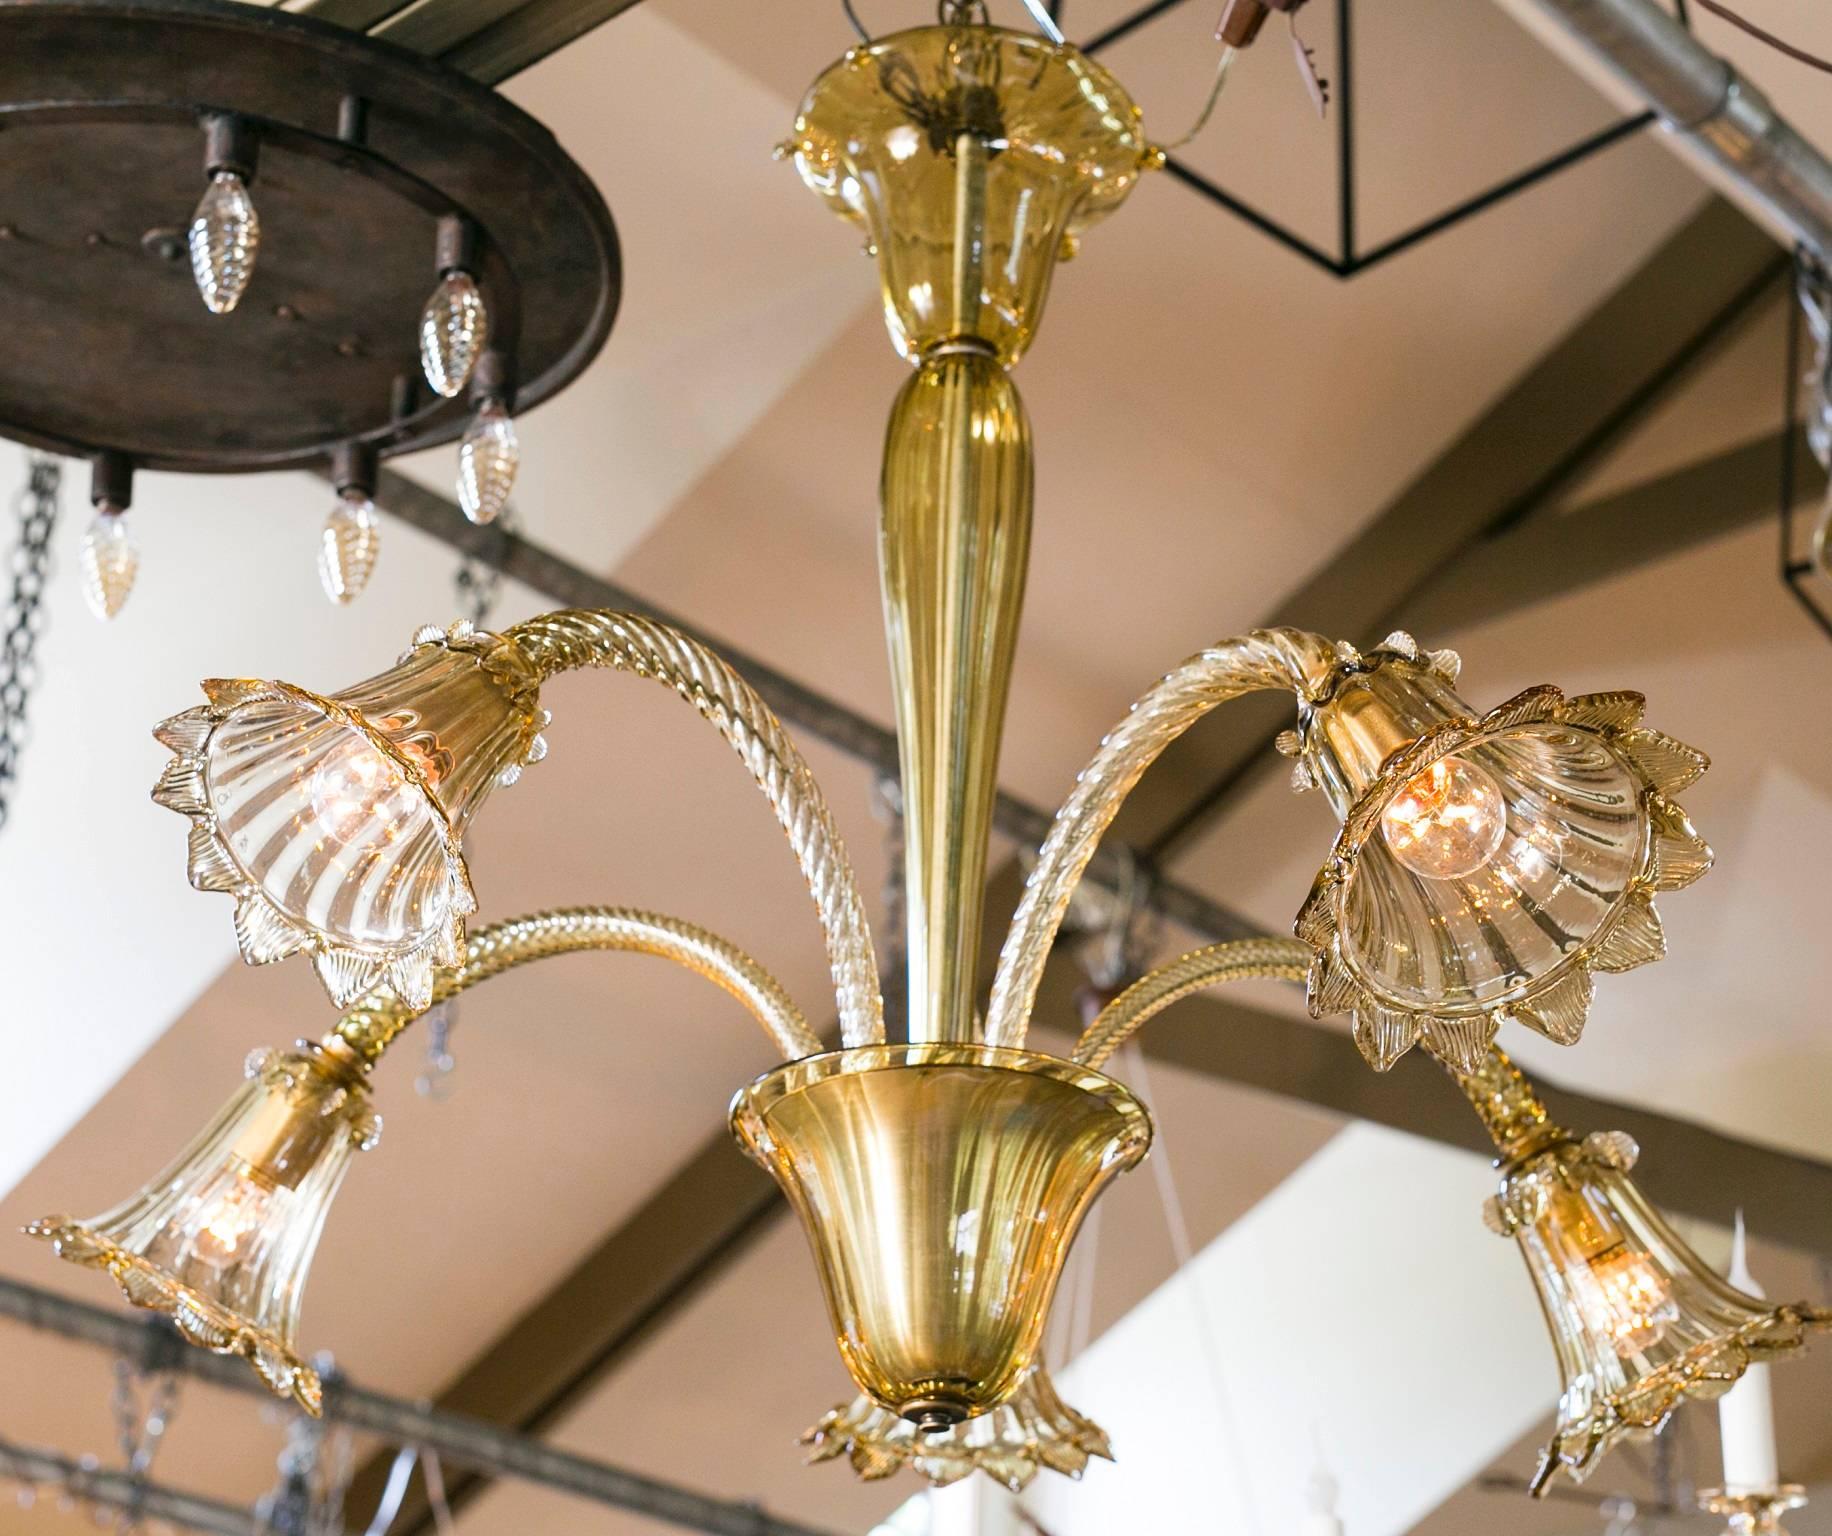 Five-arm, handblown glass chandelier from Murano, Italy, circa 1930. Beautiful olive-gold color and unusual shape. Newly rewired in the USA with all UL listed parts and five downward-facing Edison sockets. Comes with chain and canopy.